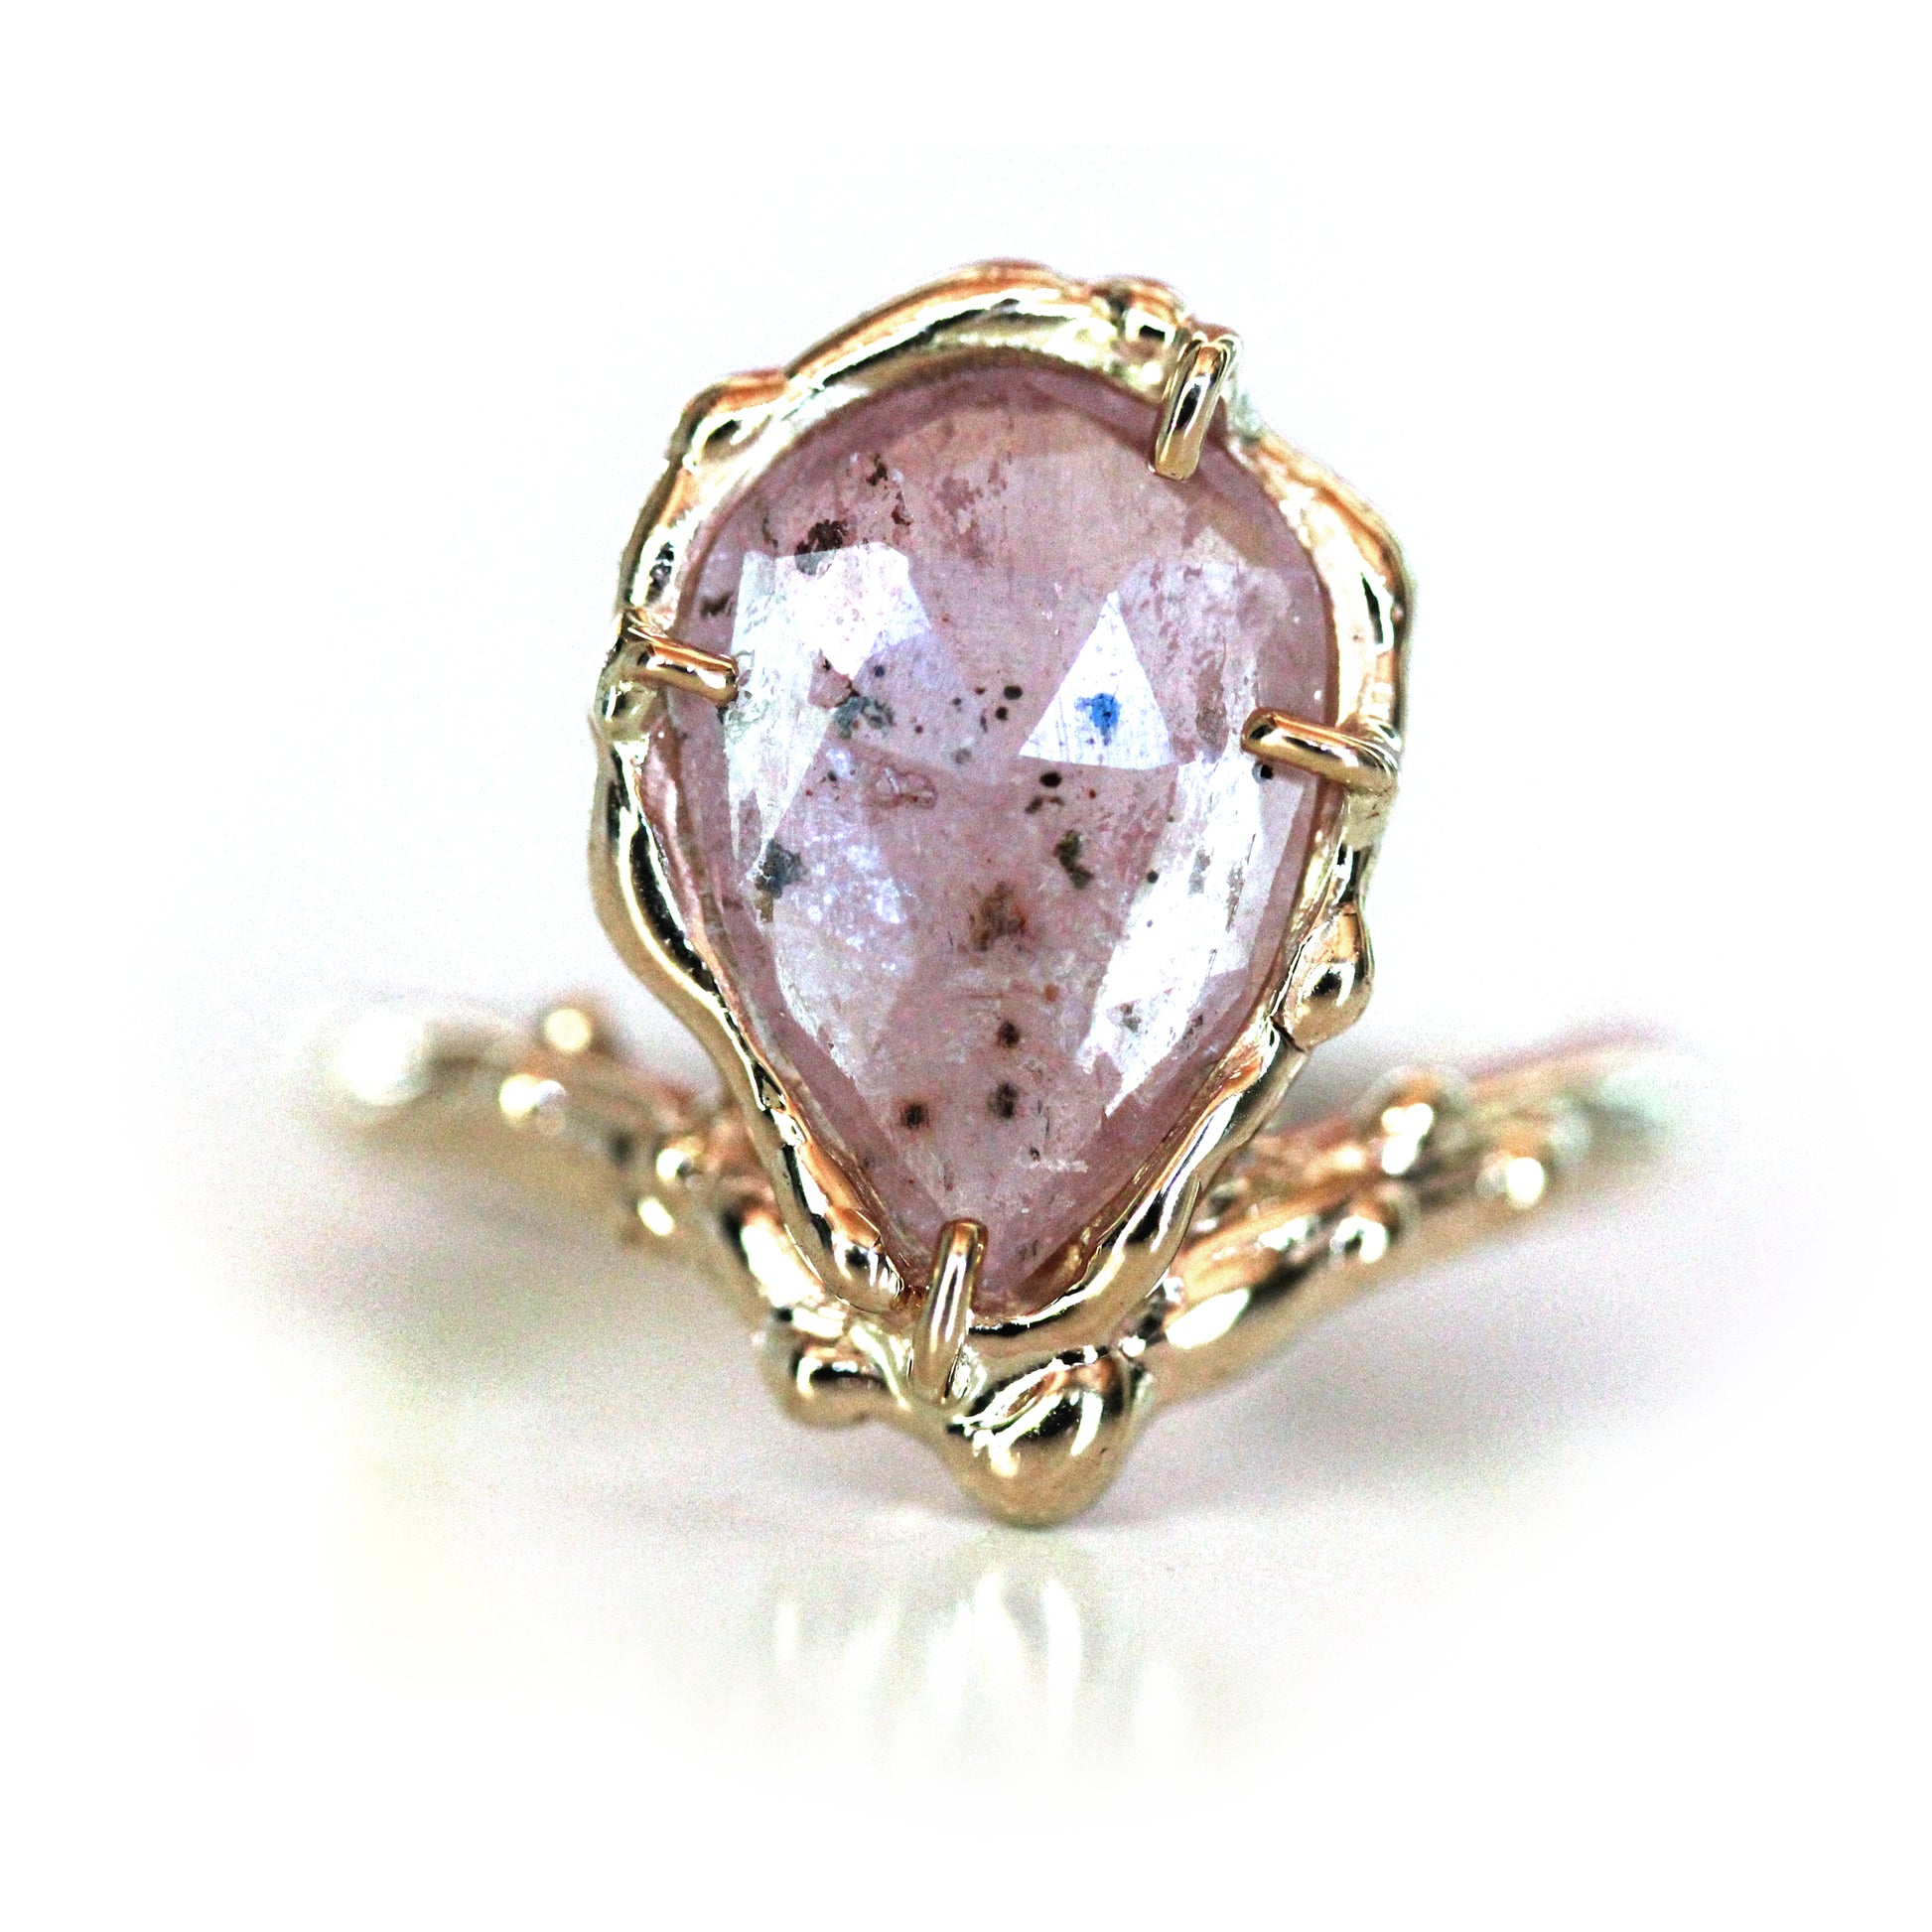 organic pear shaped handmade artist engagement ring with salt and pepper pink rose cut sapphire in asymmetrical perched design